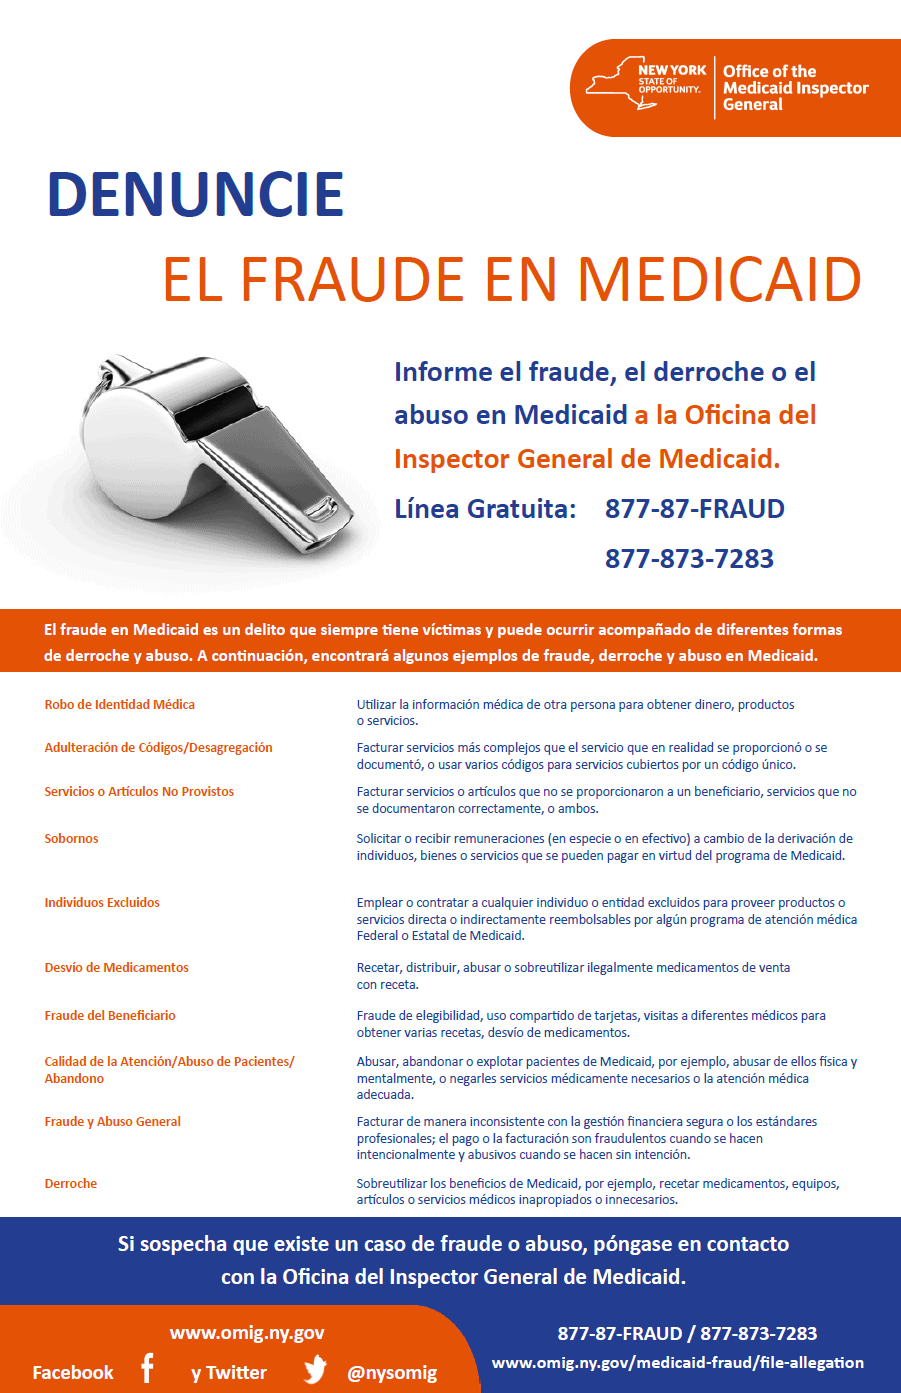 Public service announcement poster from the new york office of the medicaid inspector general, informing about medical fraud reporting with contact information.